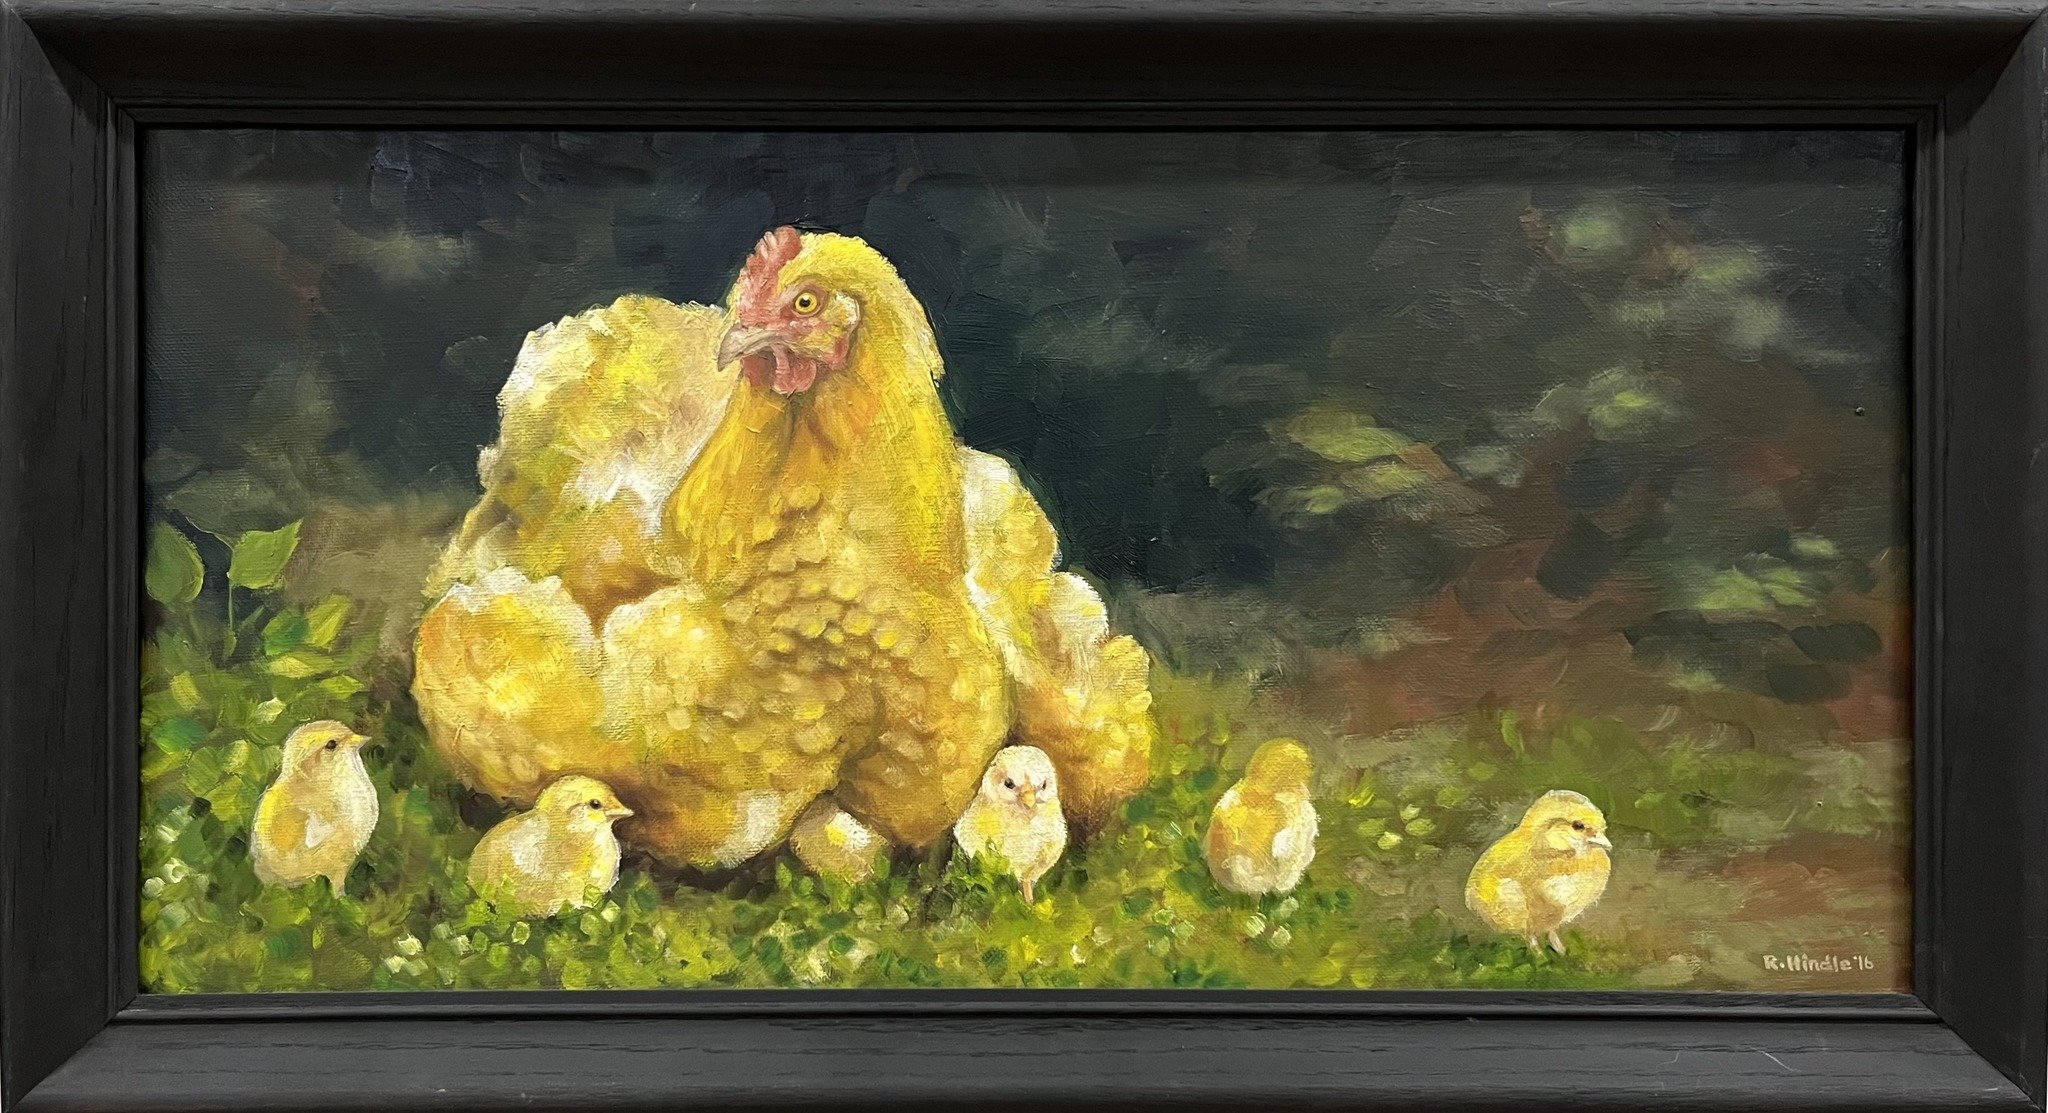 Happy Mother's Day from us here at the Hutchinson Art Center! 🐔🐣🌱
---
🖼: &quot;Hen and Chicks&quot; by Rachel Hindle, Oil on Canvas (2016), currently on display in the Hutchinson Art Center Members Consignment Gallery

__
#happymothersday #happym